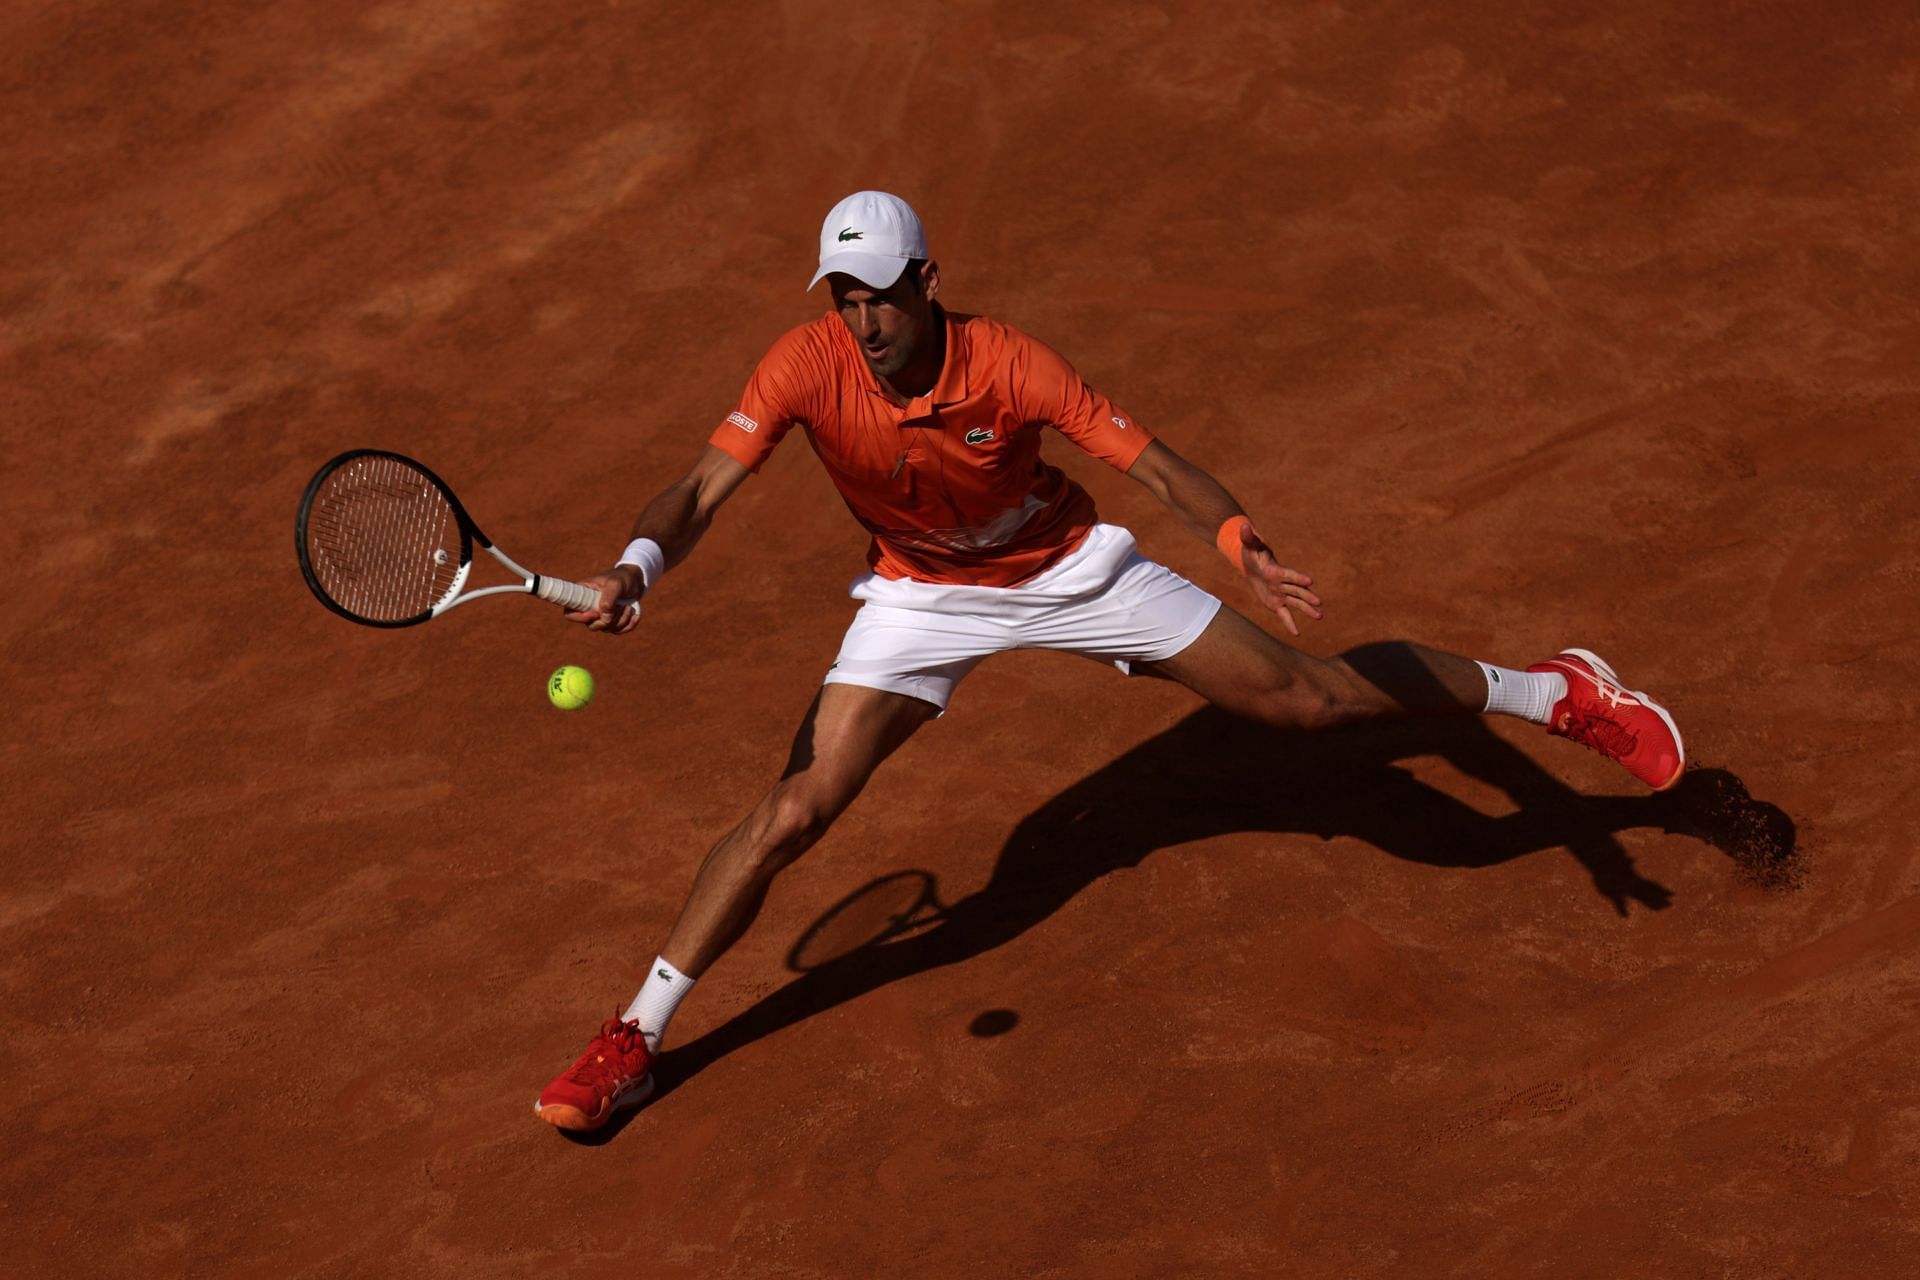 Novak Djokovic will look to make the quarterfinals of the Italian Open for the 16th consecutive year